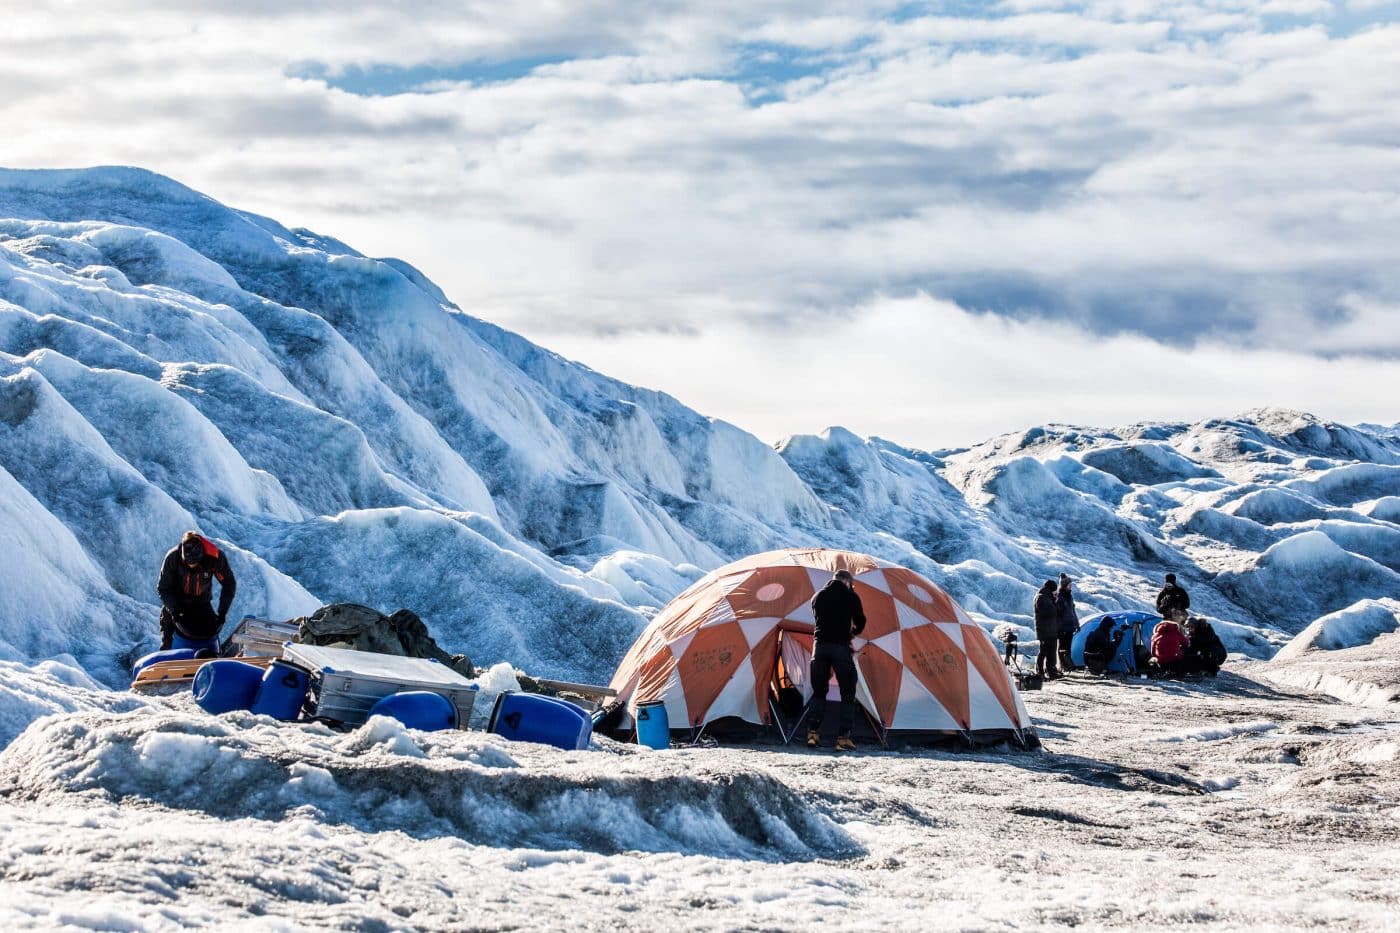 Adventurers settling in at Camp Ice Cap on the Greenland Ice Sheet, run by Albatros Arctic Circle in Kangerlussuaq. By Raven Eye Photography